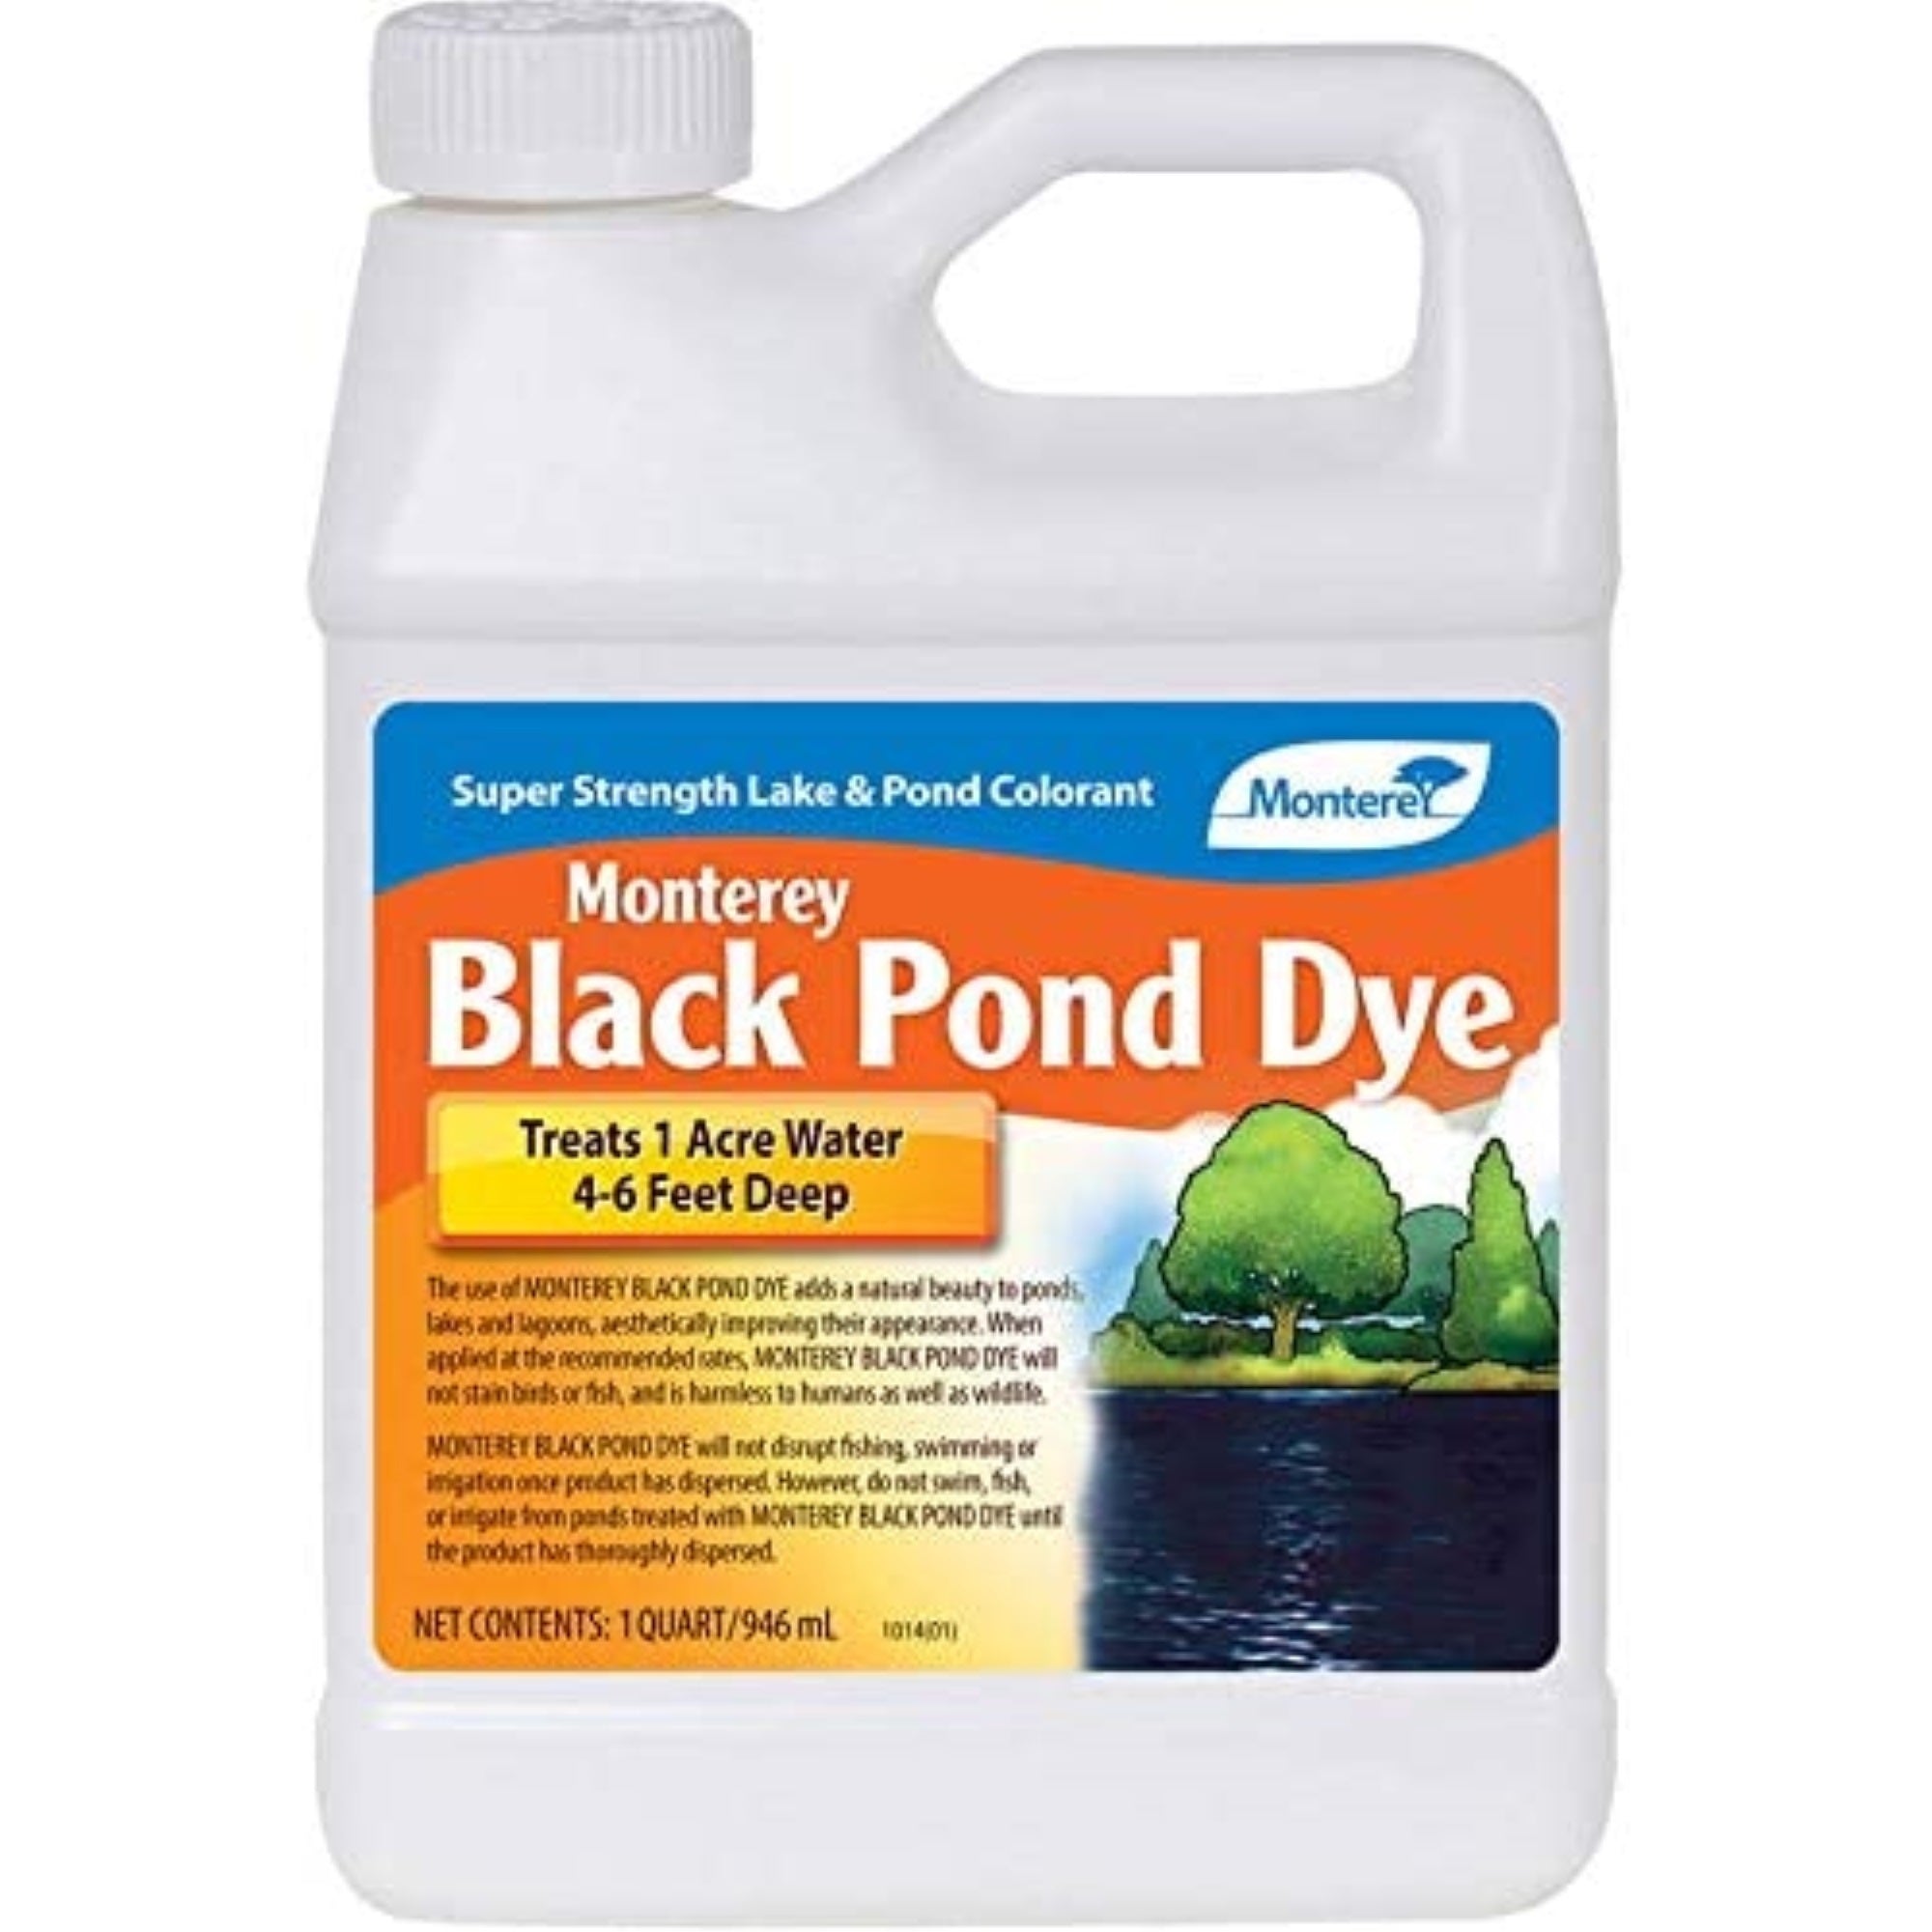 Monterey Black Pond Dye, Concentrated Lake And Pond Colorant, Black, 1 Qt